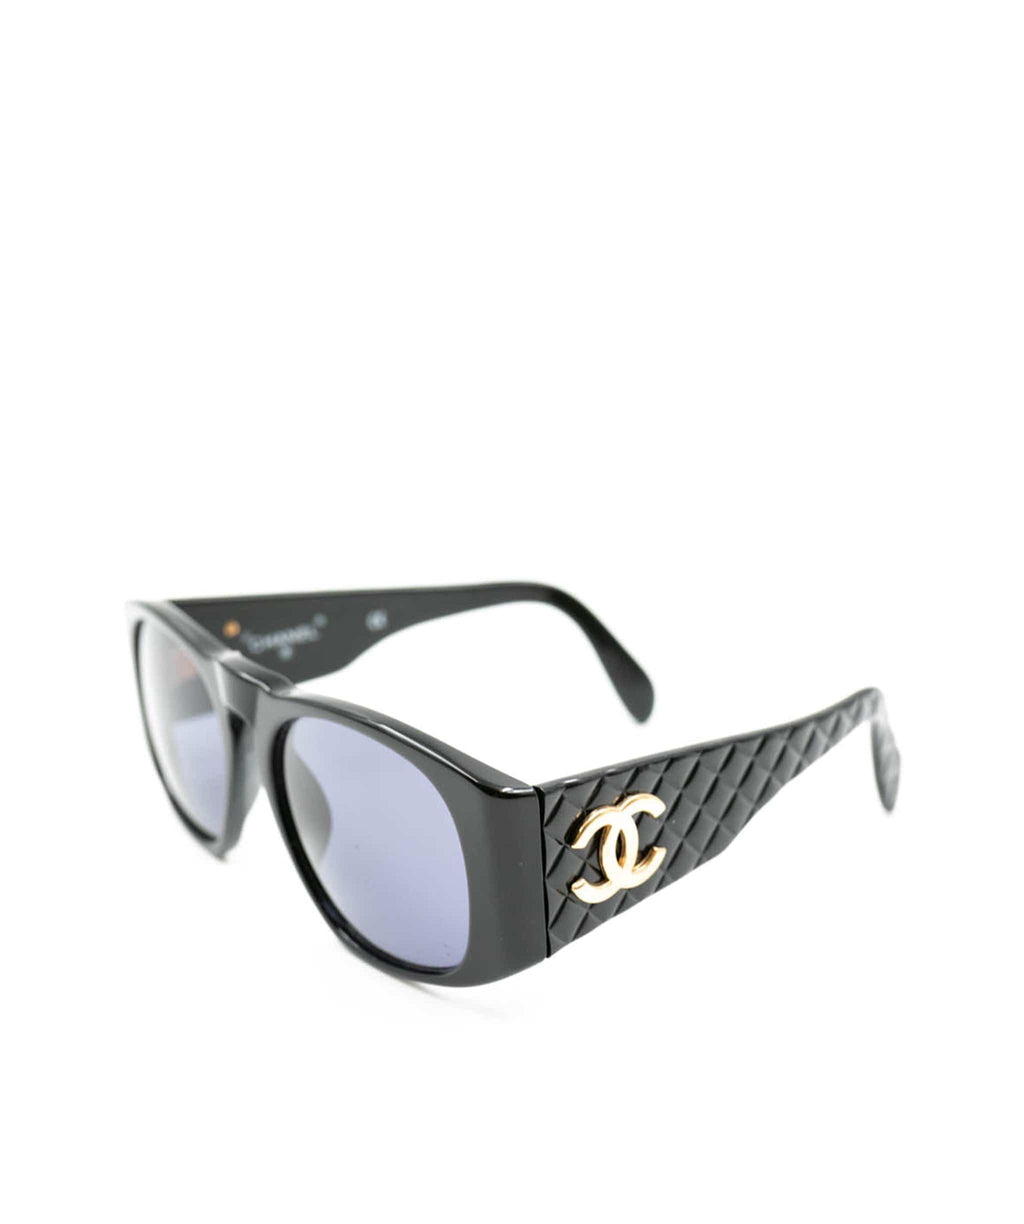 Chanel Black and Silver CC Logo quilted Arm Sunglasses 5050